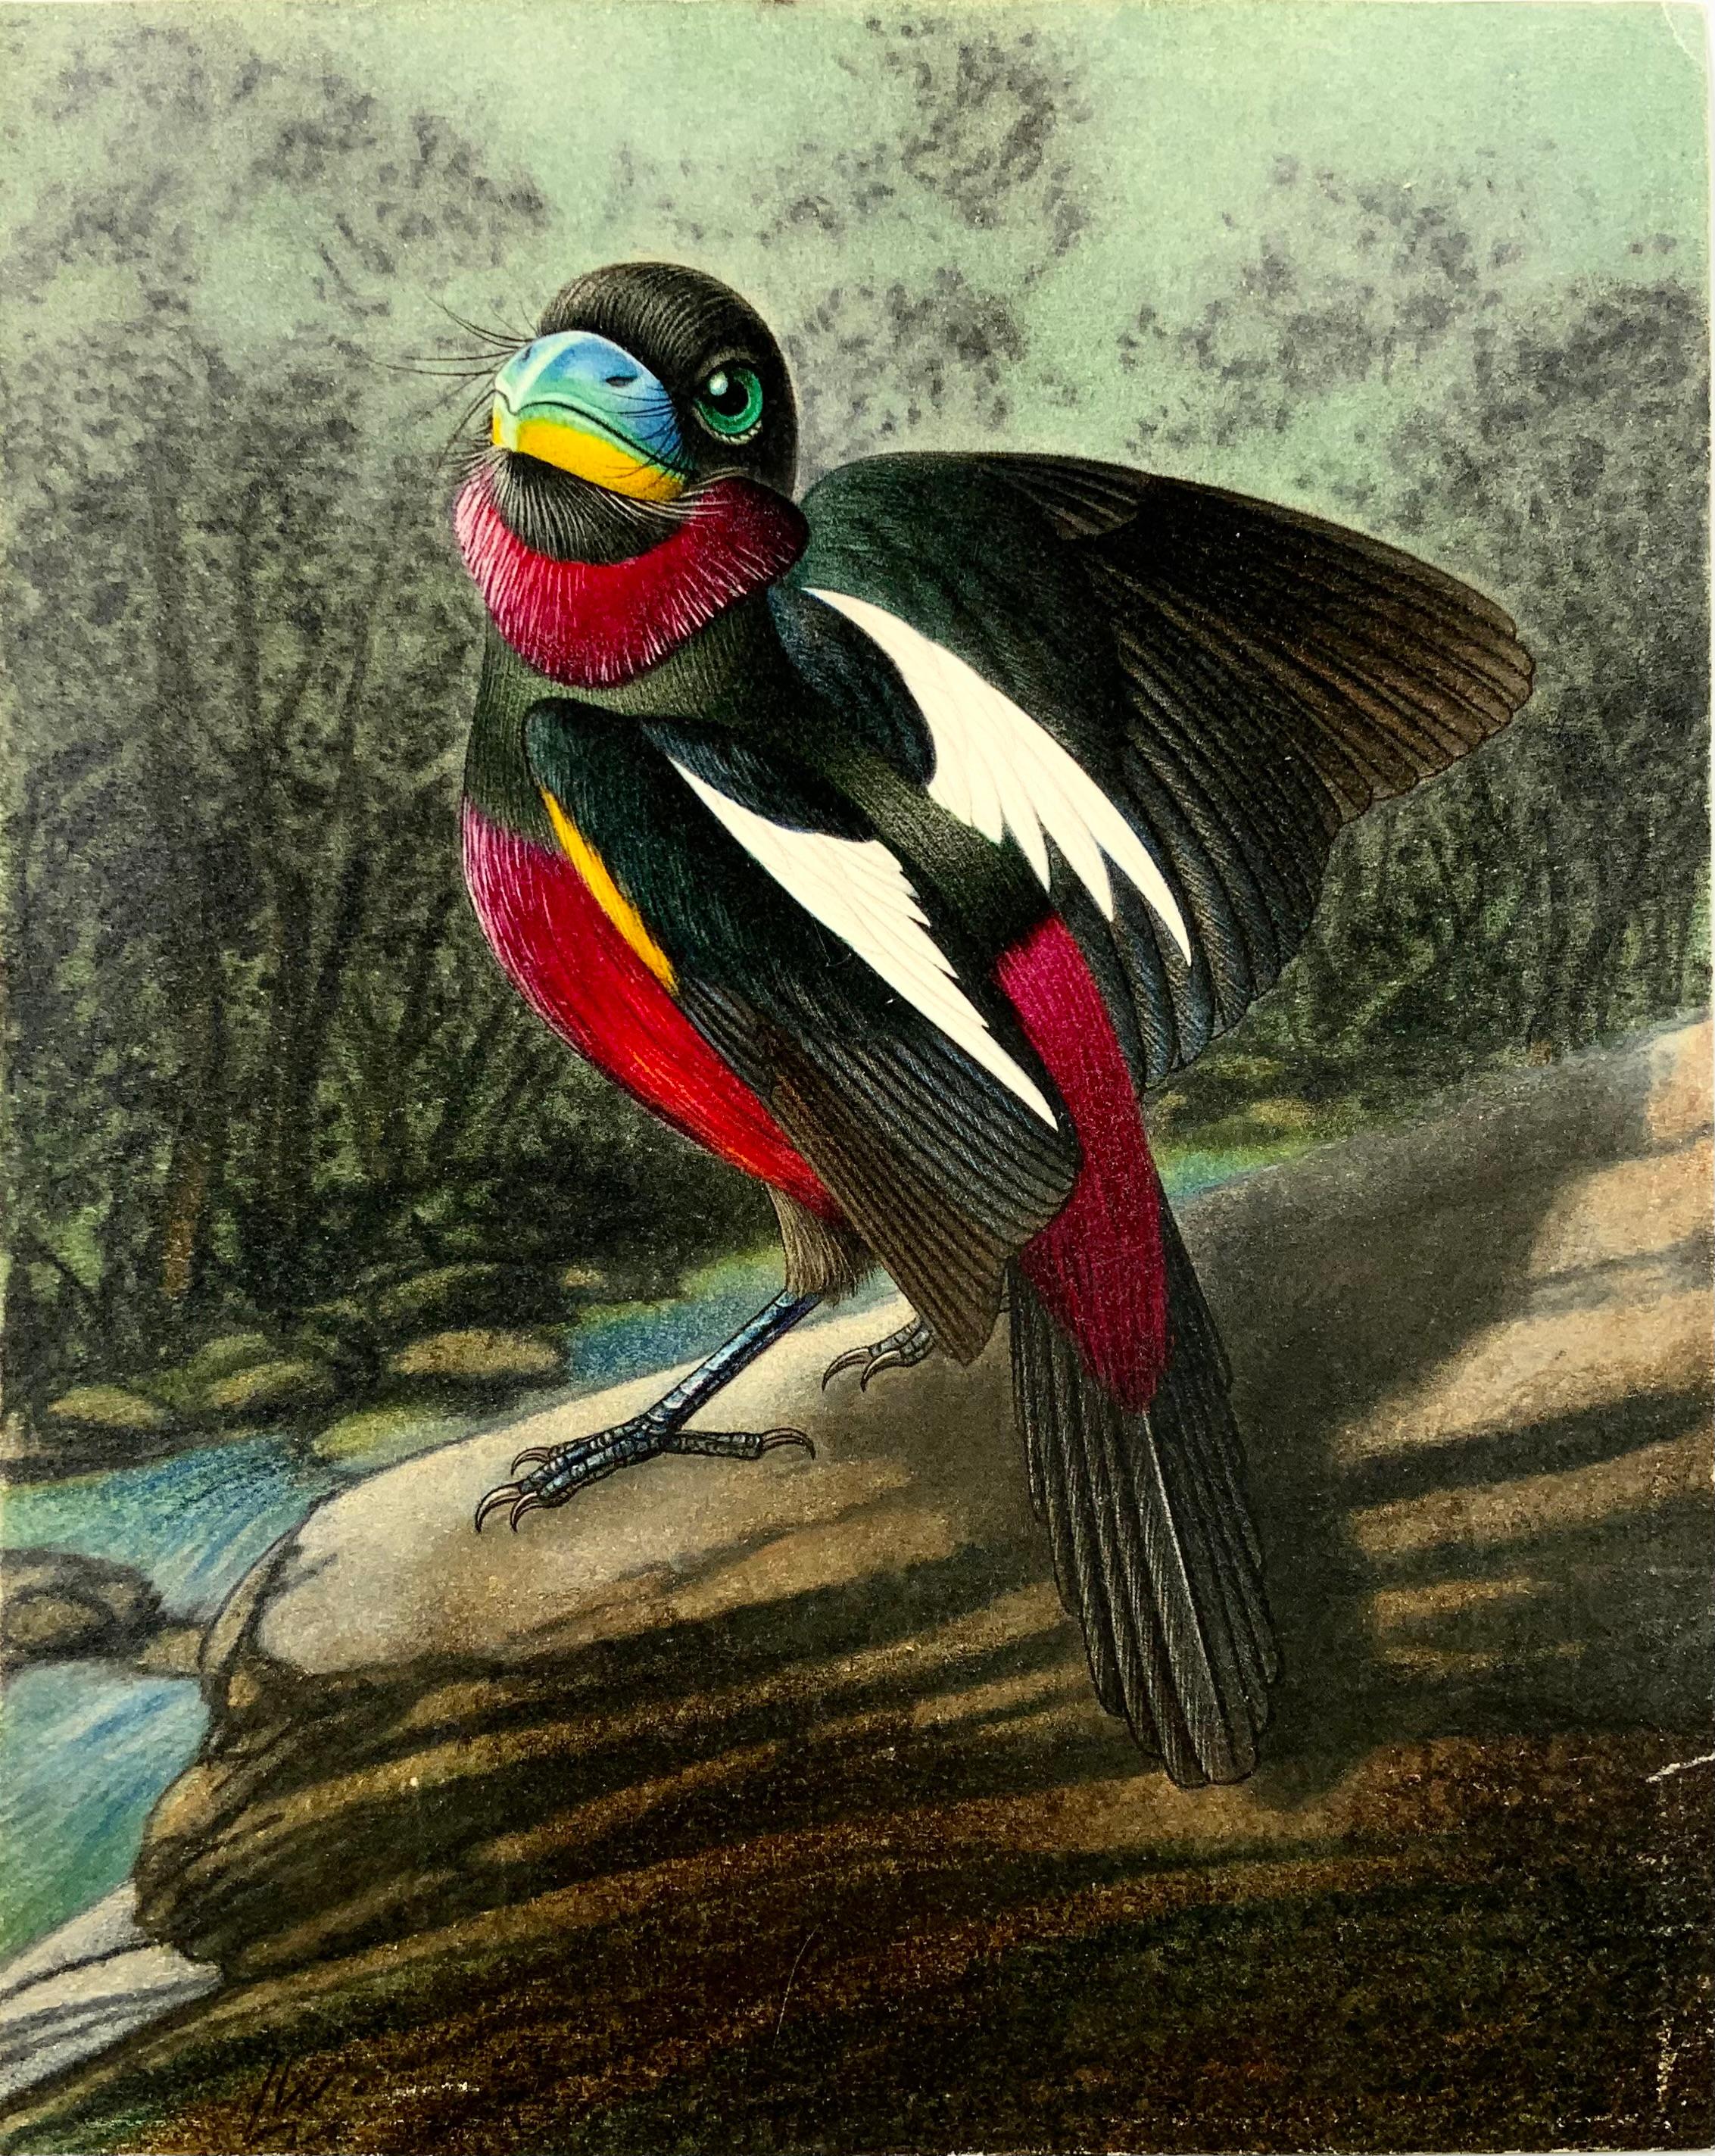 ORIGINAL coloured Pencil Drawing 

(18.2 x 14.6 cm) 

Original drawing in colored chalk by world renowned illustrator of birds, insects and animals. 

circa 1952.

Used as basis for the illustration found present in Ernst Sutter’s